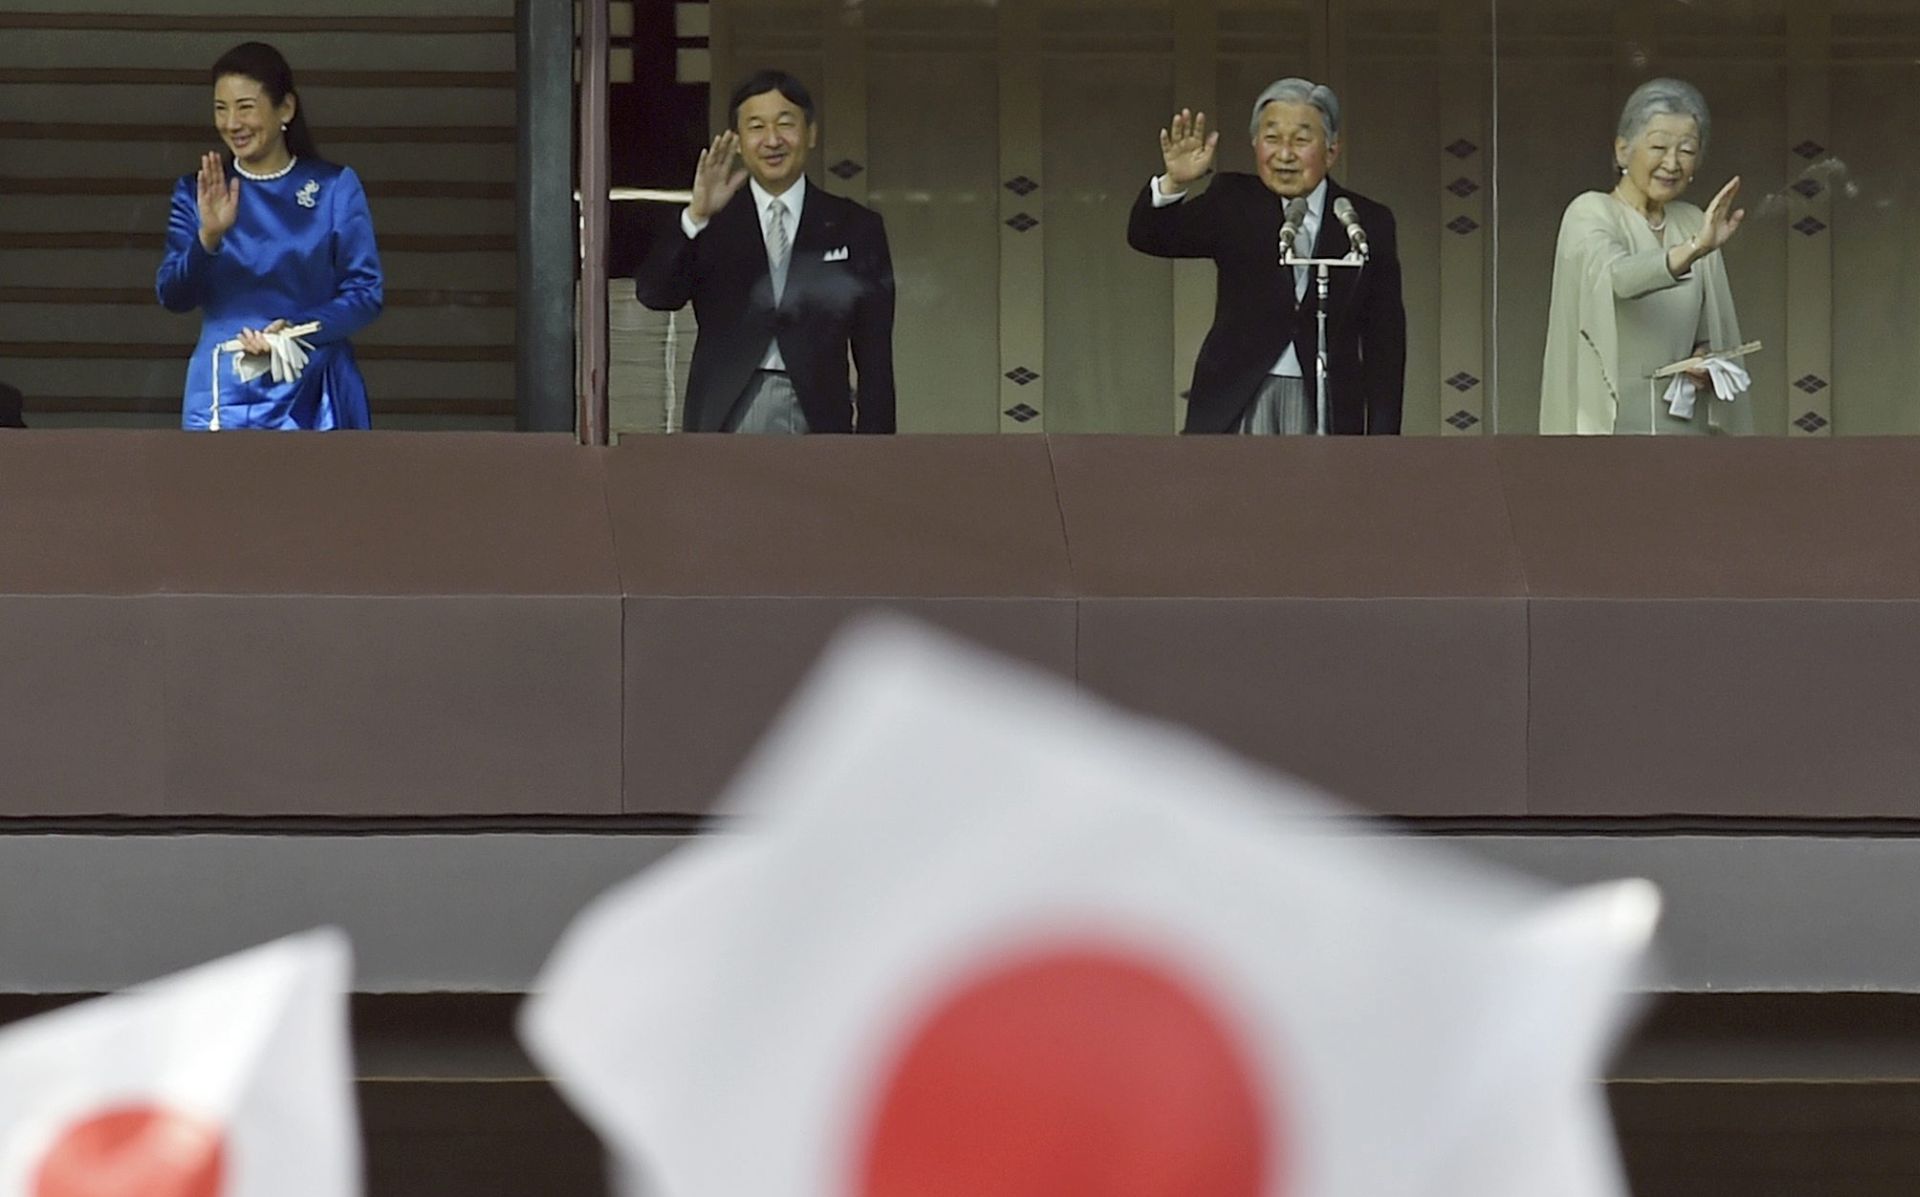 epa05694774 Japan's Emperor Akihito (2-R) and Empress Michiko (R) with Crown Prince Naruhito (2-L) and Crown Princess Masako (L) wave to well-wishers through bullet-proof glass from a balcony during the New Year's public appearance at the Imperial Palace in central Tokyo, Japan, 02 January 2017. Emperor Akihito and royal family members greeted well-wishers for the new year.  EPA/FRANCK ROBICHON